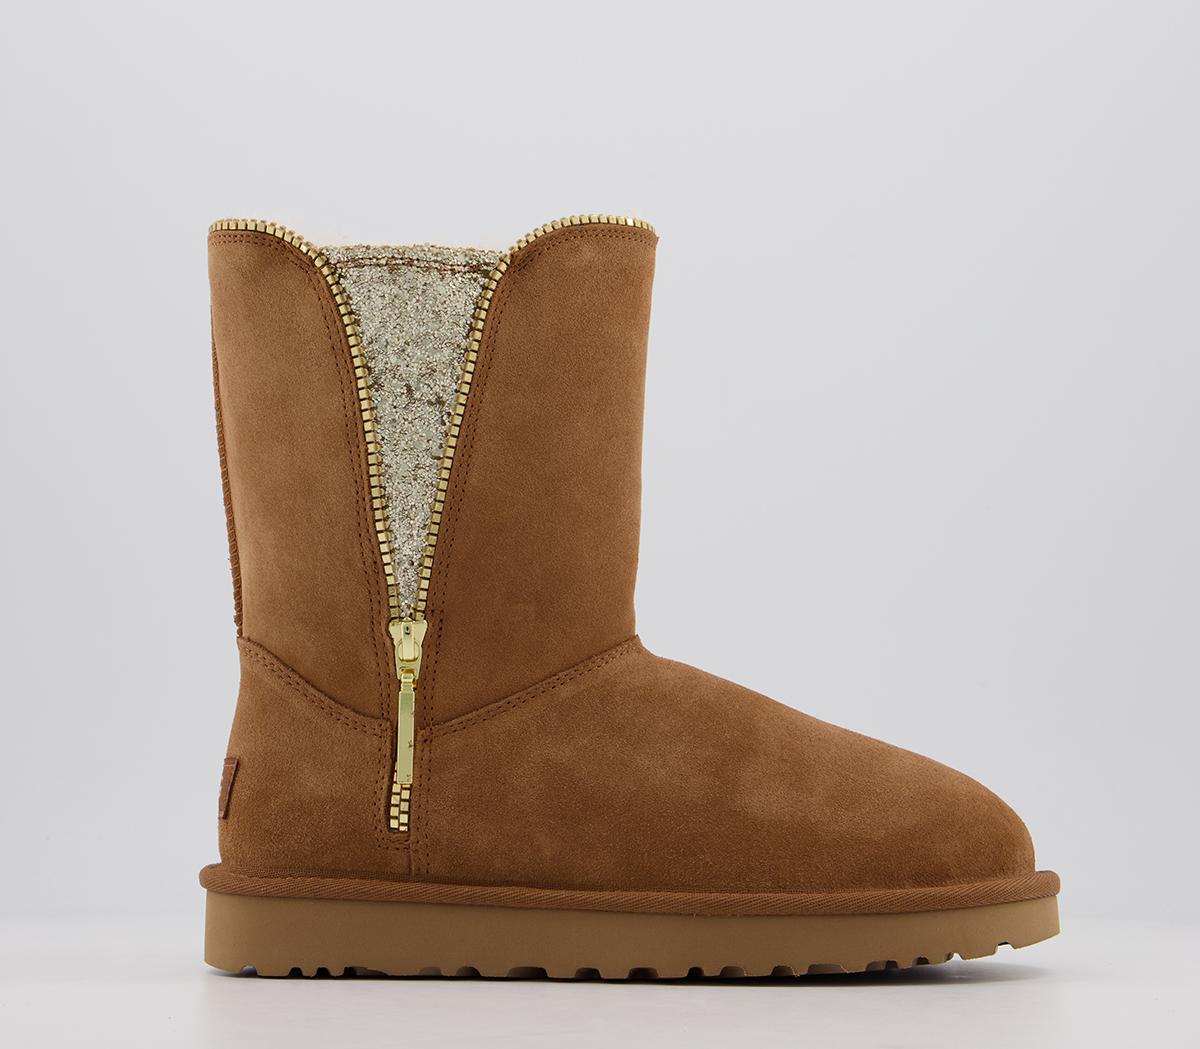 classic ugg boots chestnut